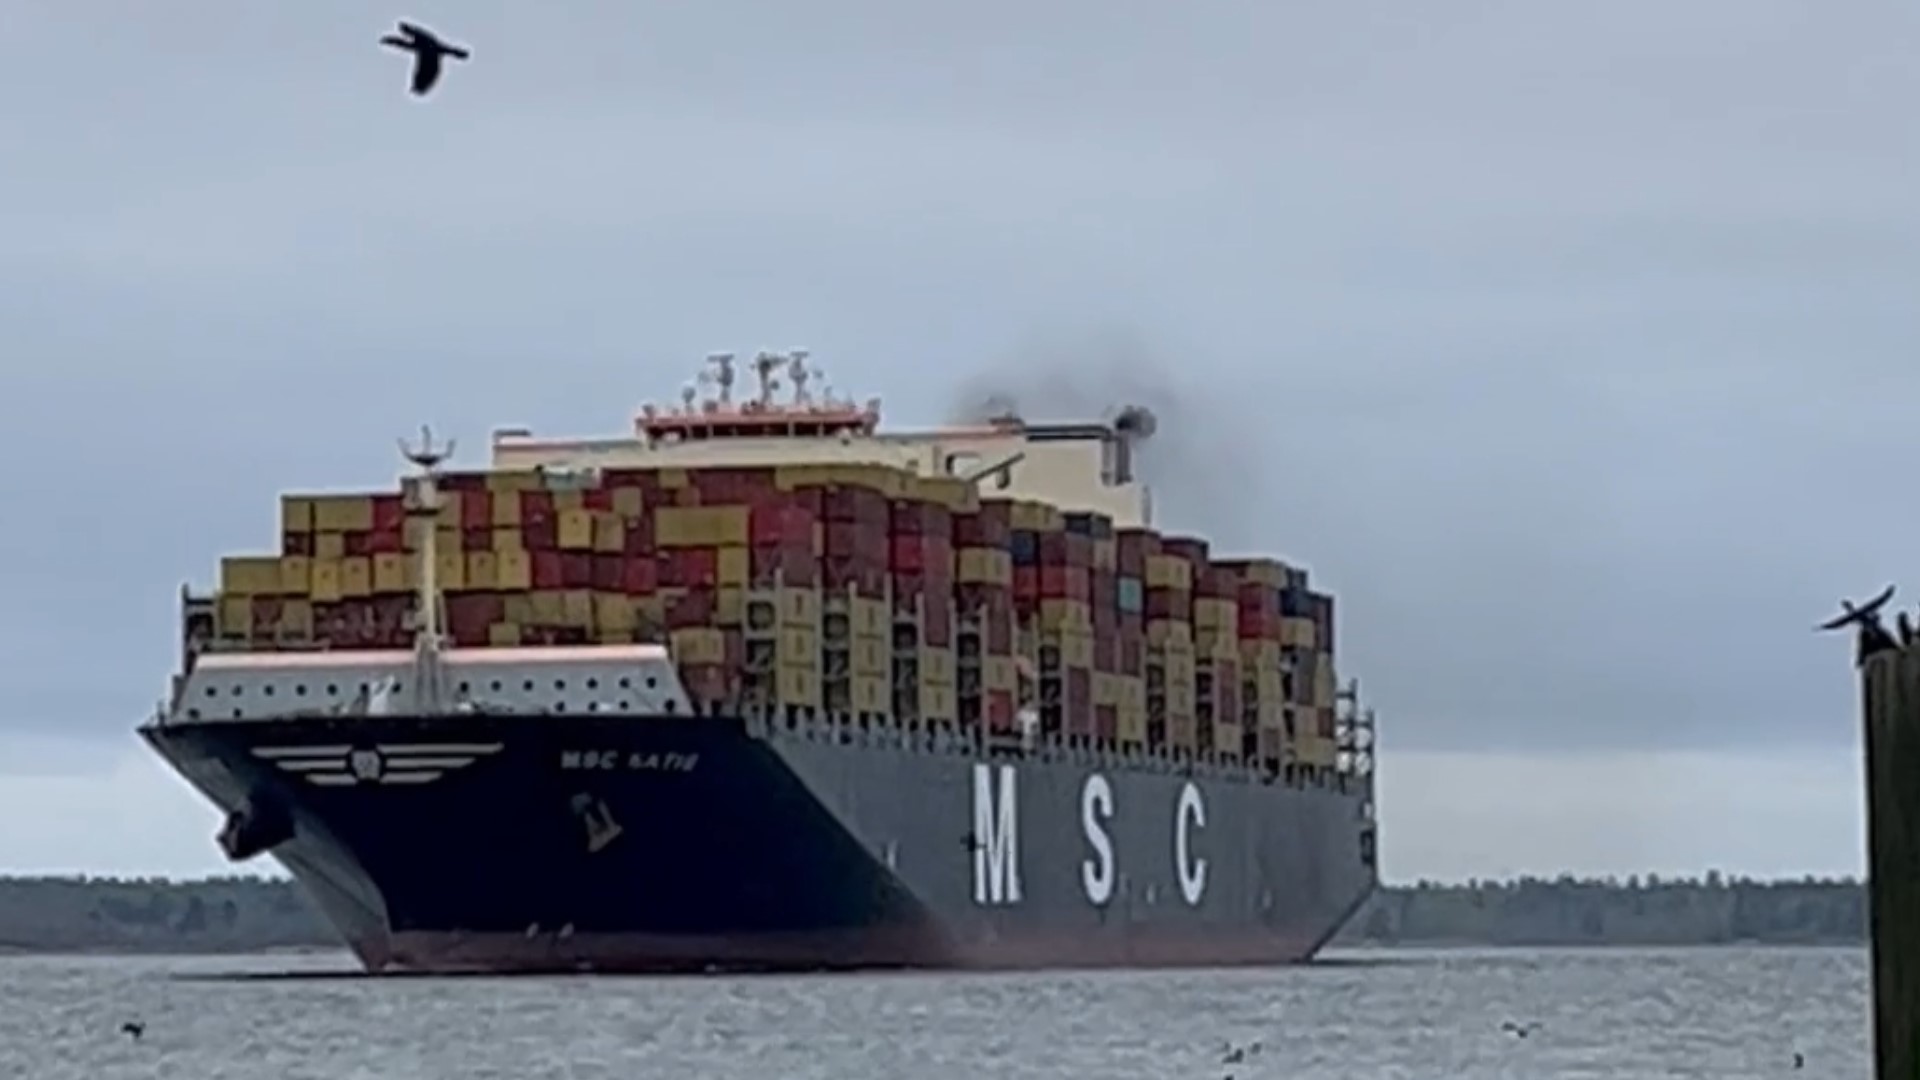 The container ship MSC Katie is 1,200 feet long and has a cargo capacity equivalent to 12,400 standard 20-foot shipping containers.